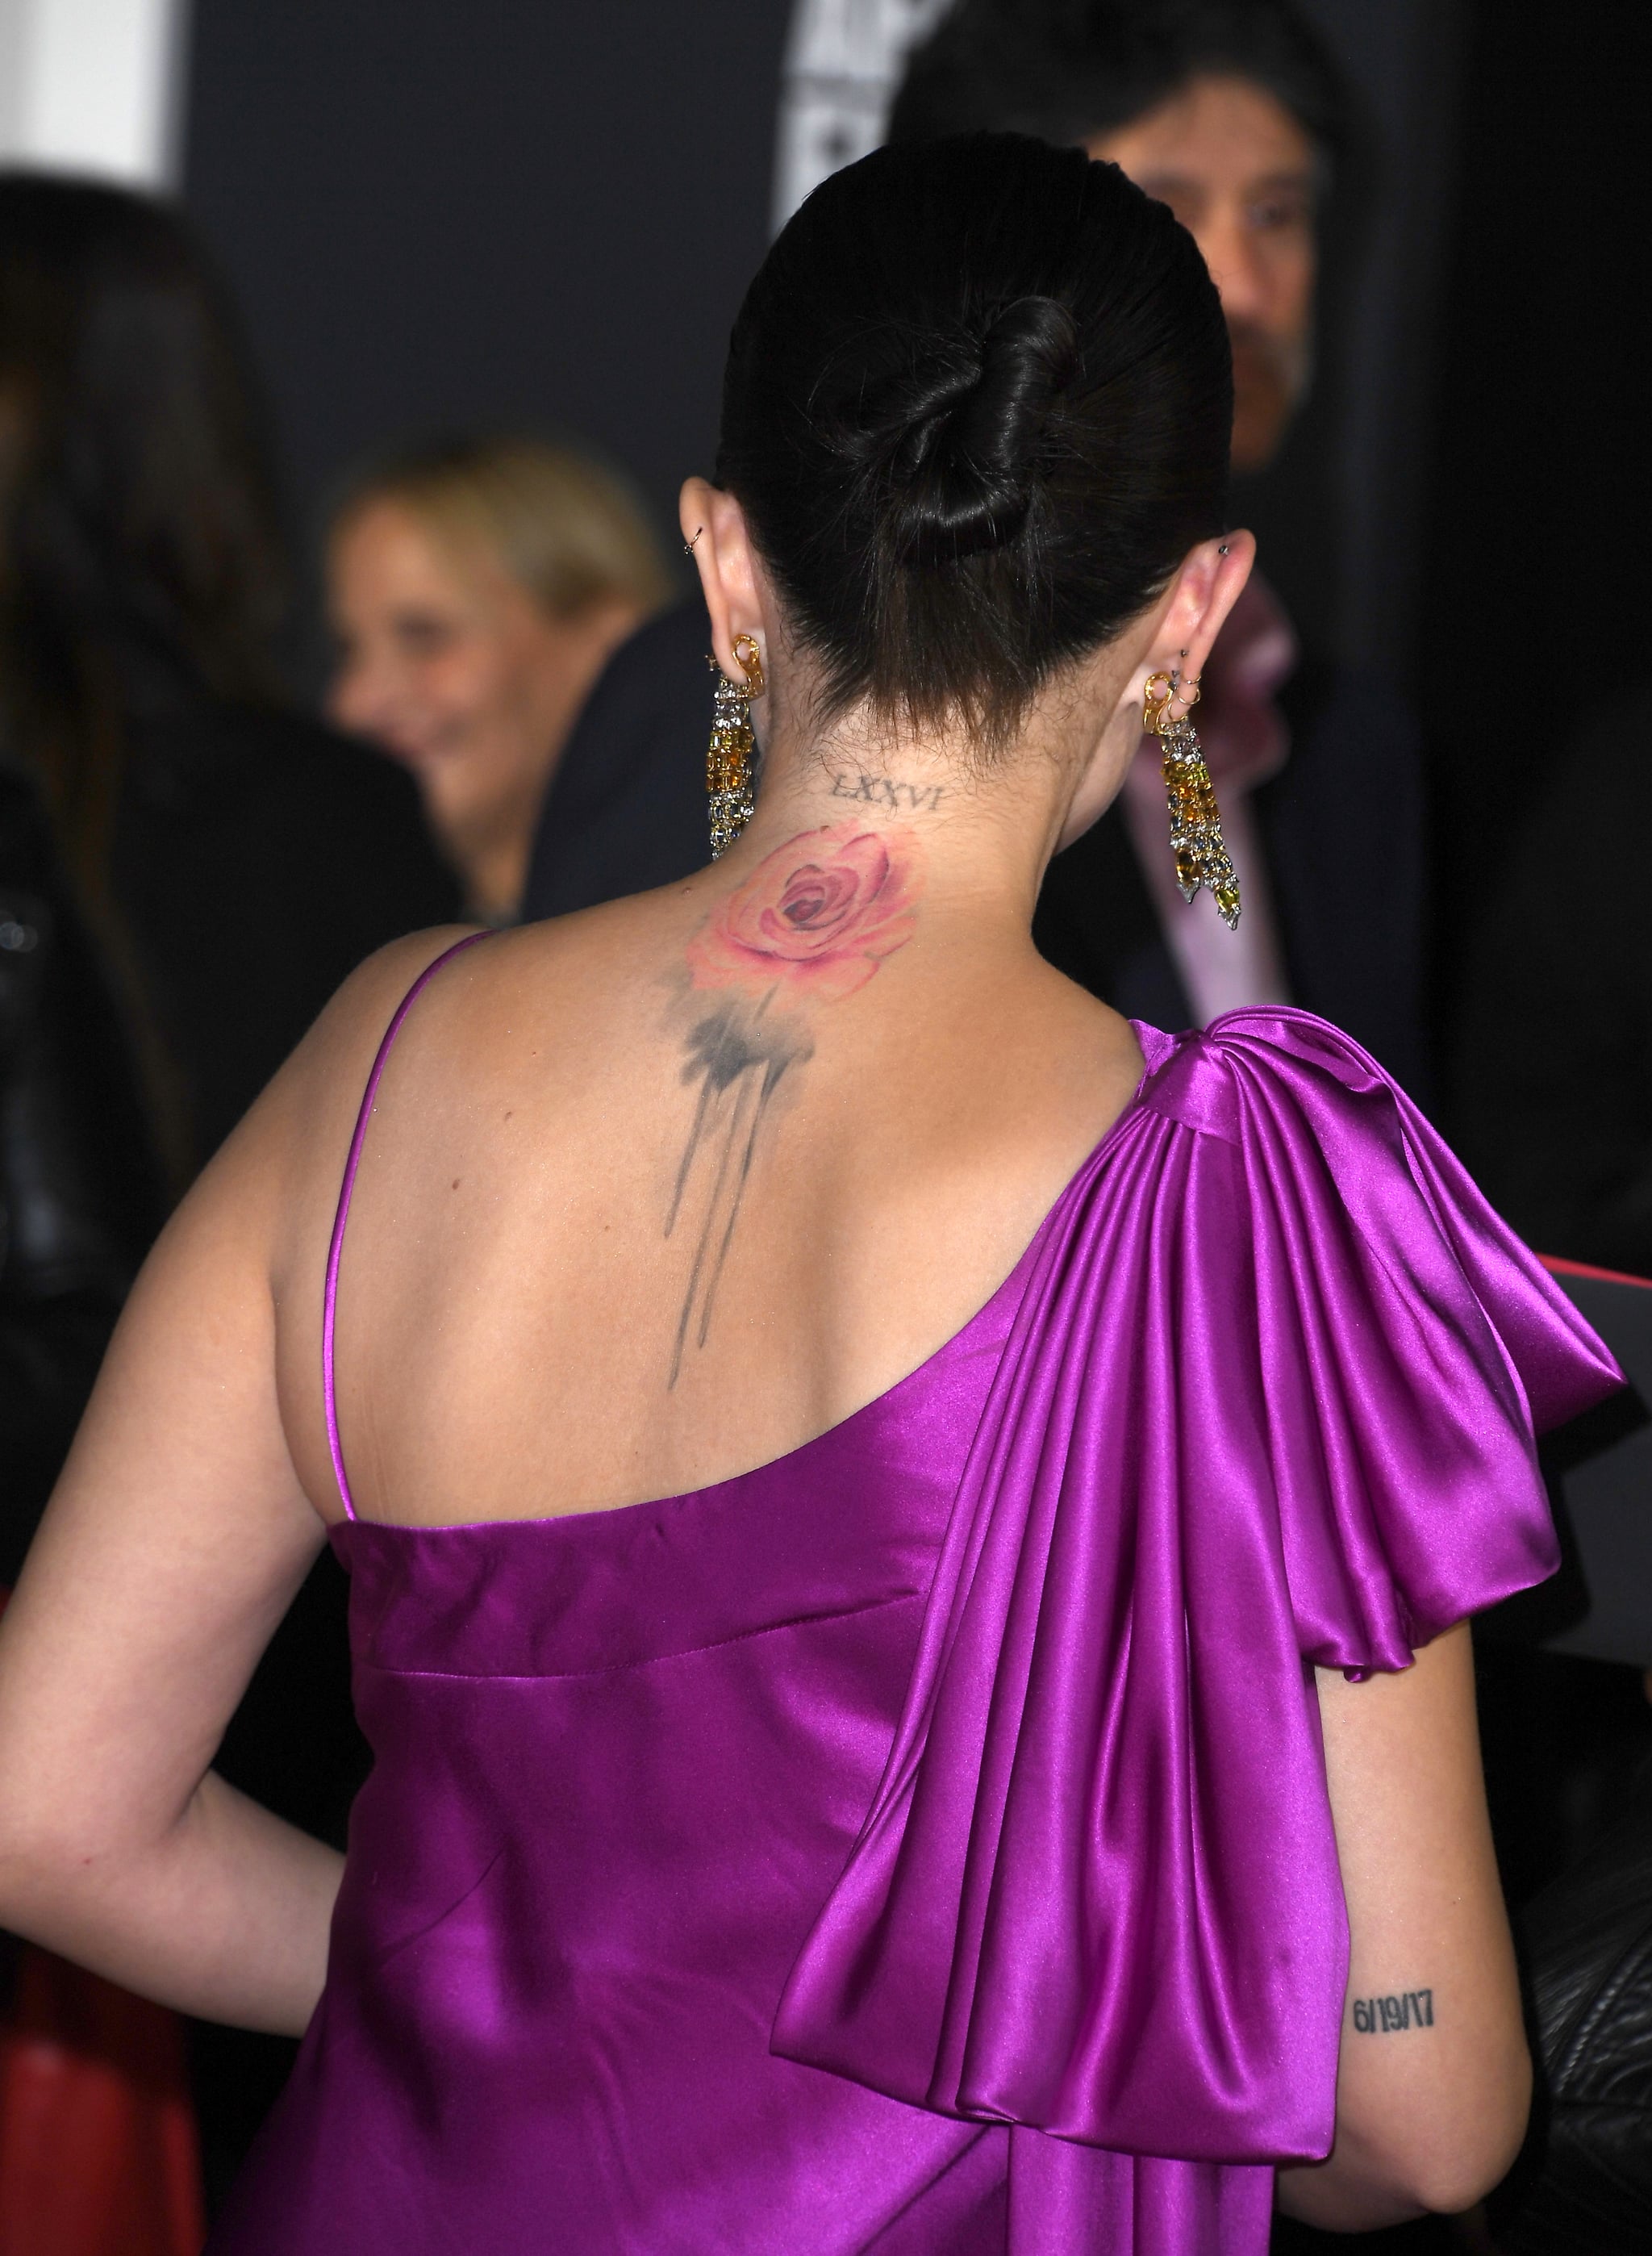 Selena Gomez 15 Tattoos Photos of Ink Designs and Meanings